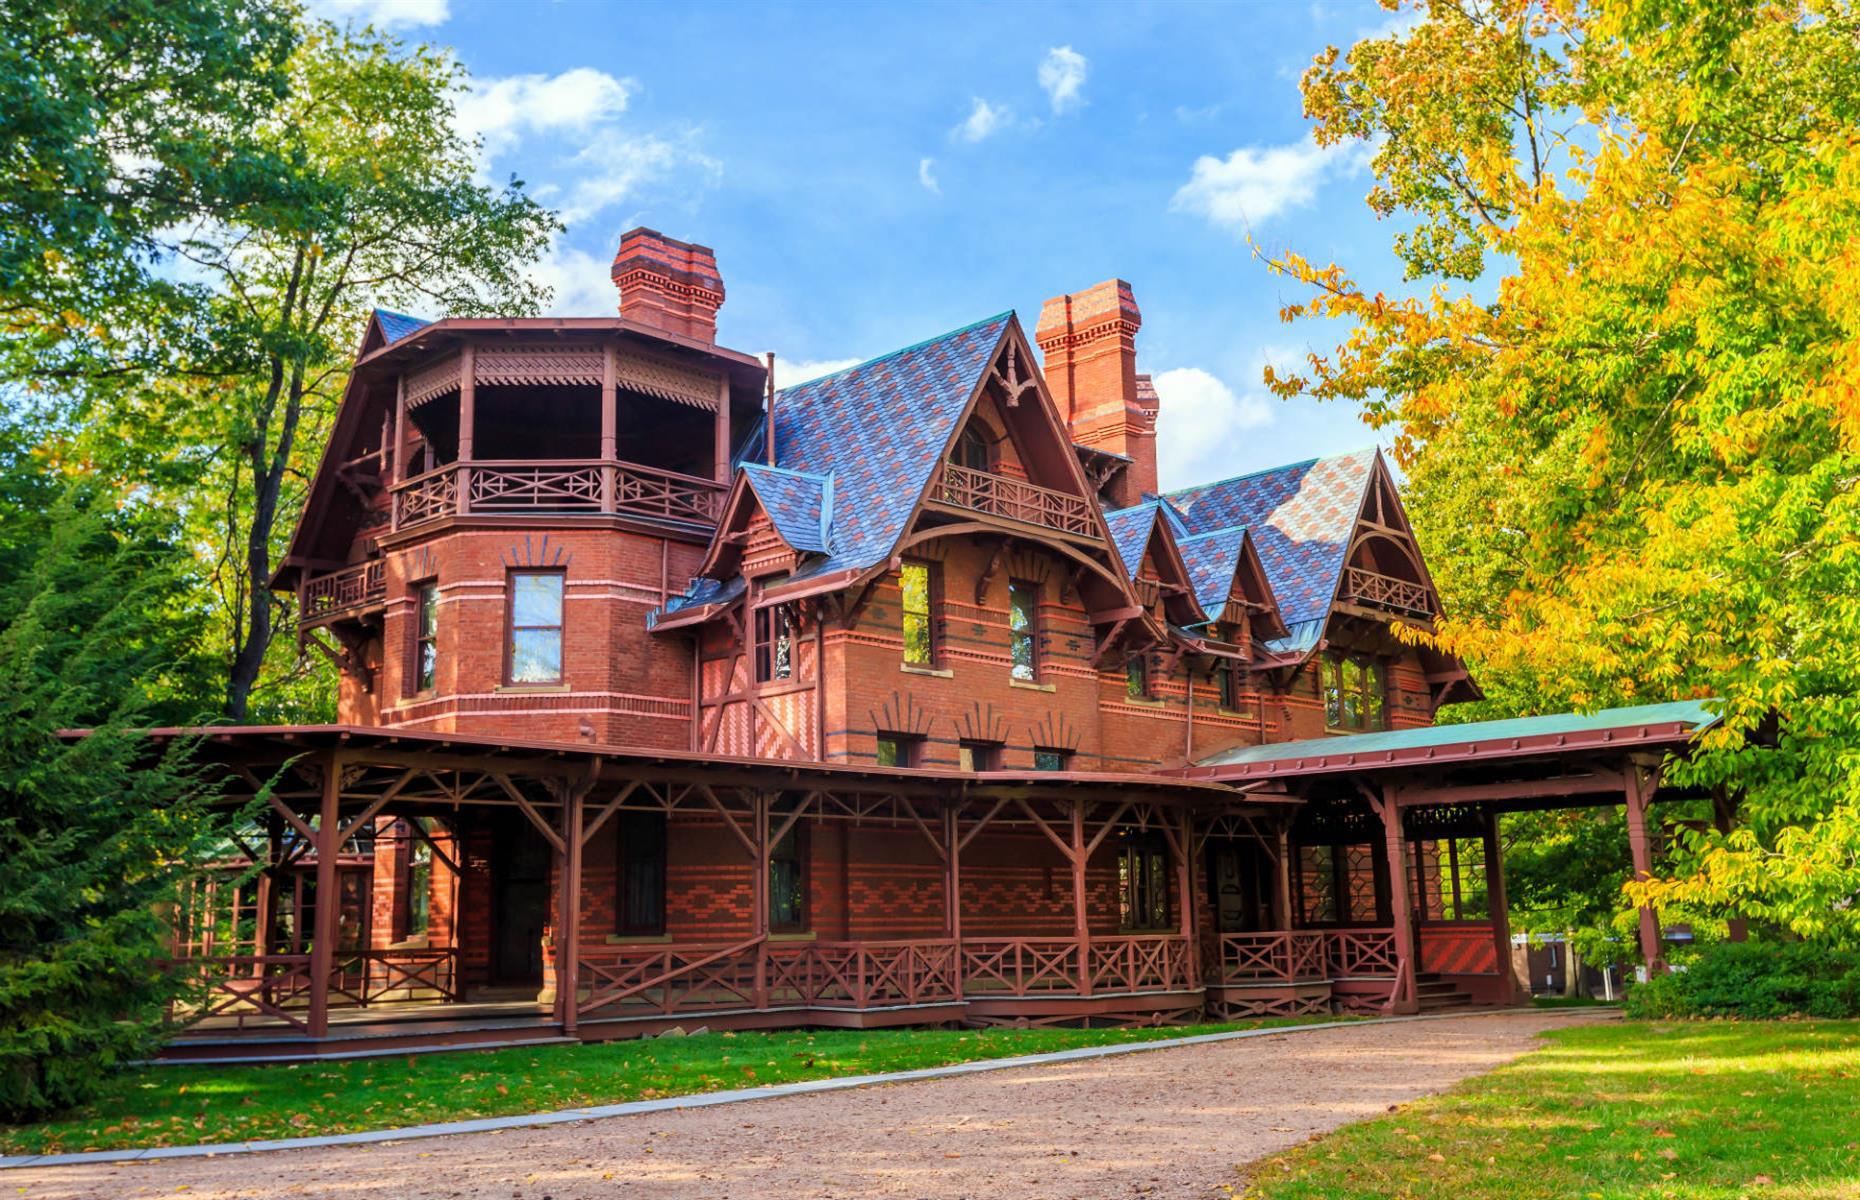 <p>Follow in the footsteps of one of the most famous authors in the world as you walk the halls of Samuel Clemens' (aka Mark Twain's) home. The impressive 25-room Gothic mansion includes the grand hall, library and billiards room where the author penned <em>Adventures of Huckleberry Finn</em> and <em>The Prince and The Pauper</em> among others. The house can only be visited on <a href="https://marktwainhouse.org/">guided tours</a> which run daily (closed on Tuesdays) and tickets start from $24 (discounts for children and seniors).</p>